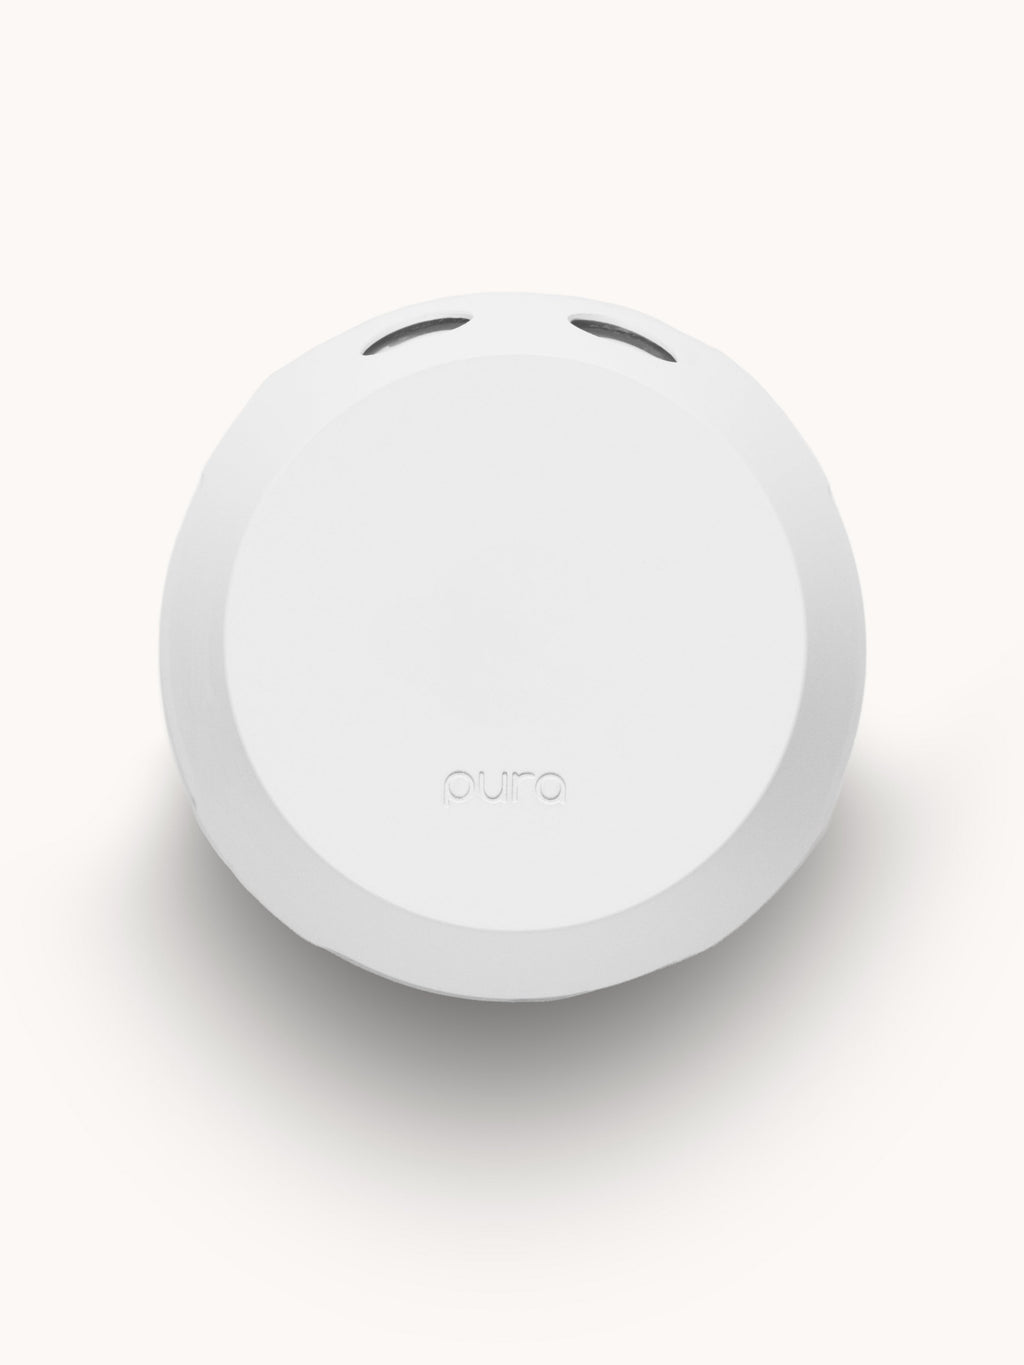 Pura Smart Fragrance Diffuser :: Is it Worth the Money?